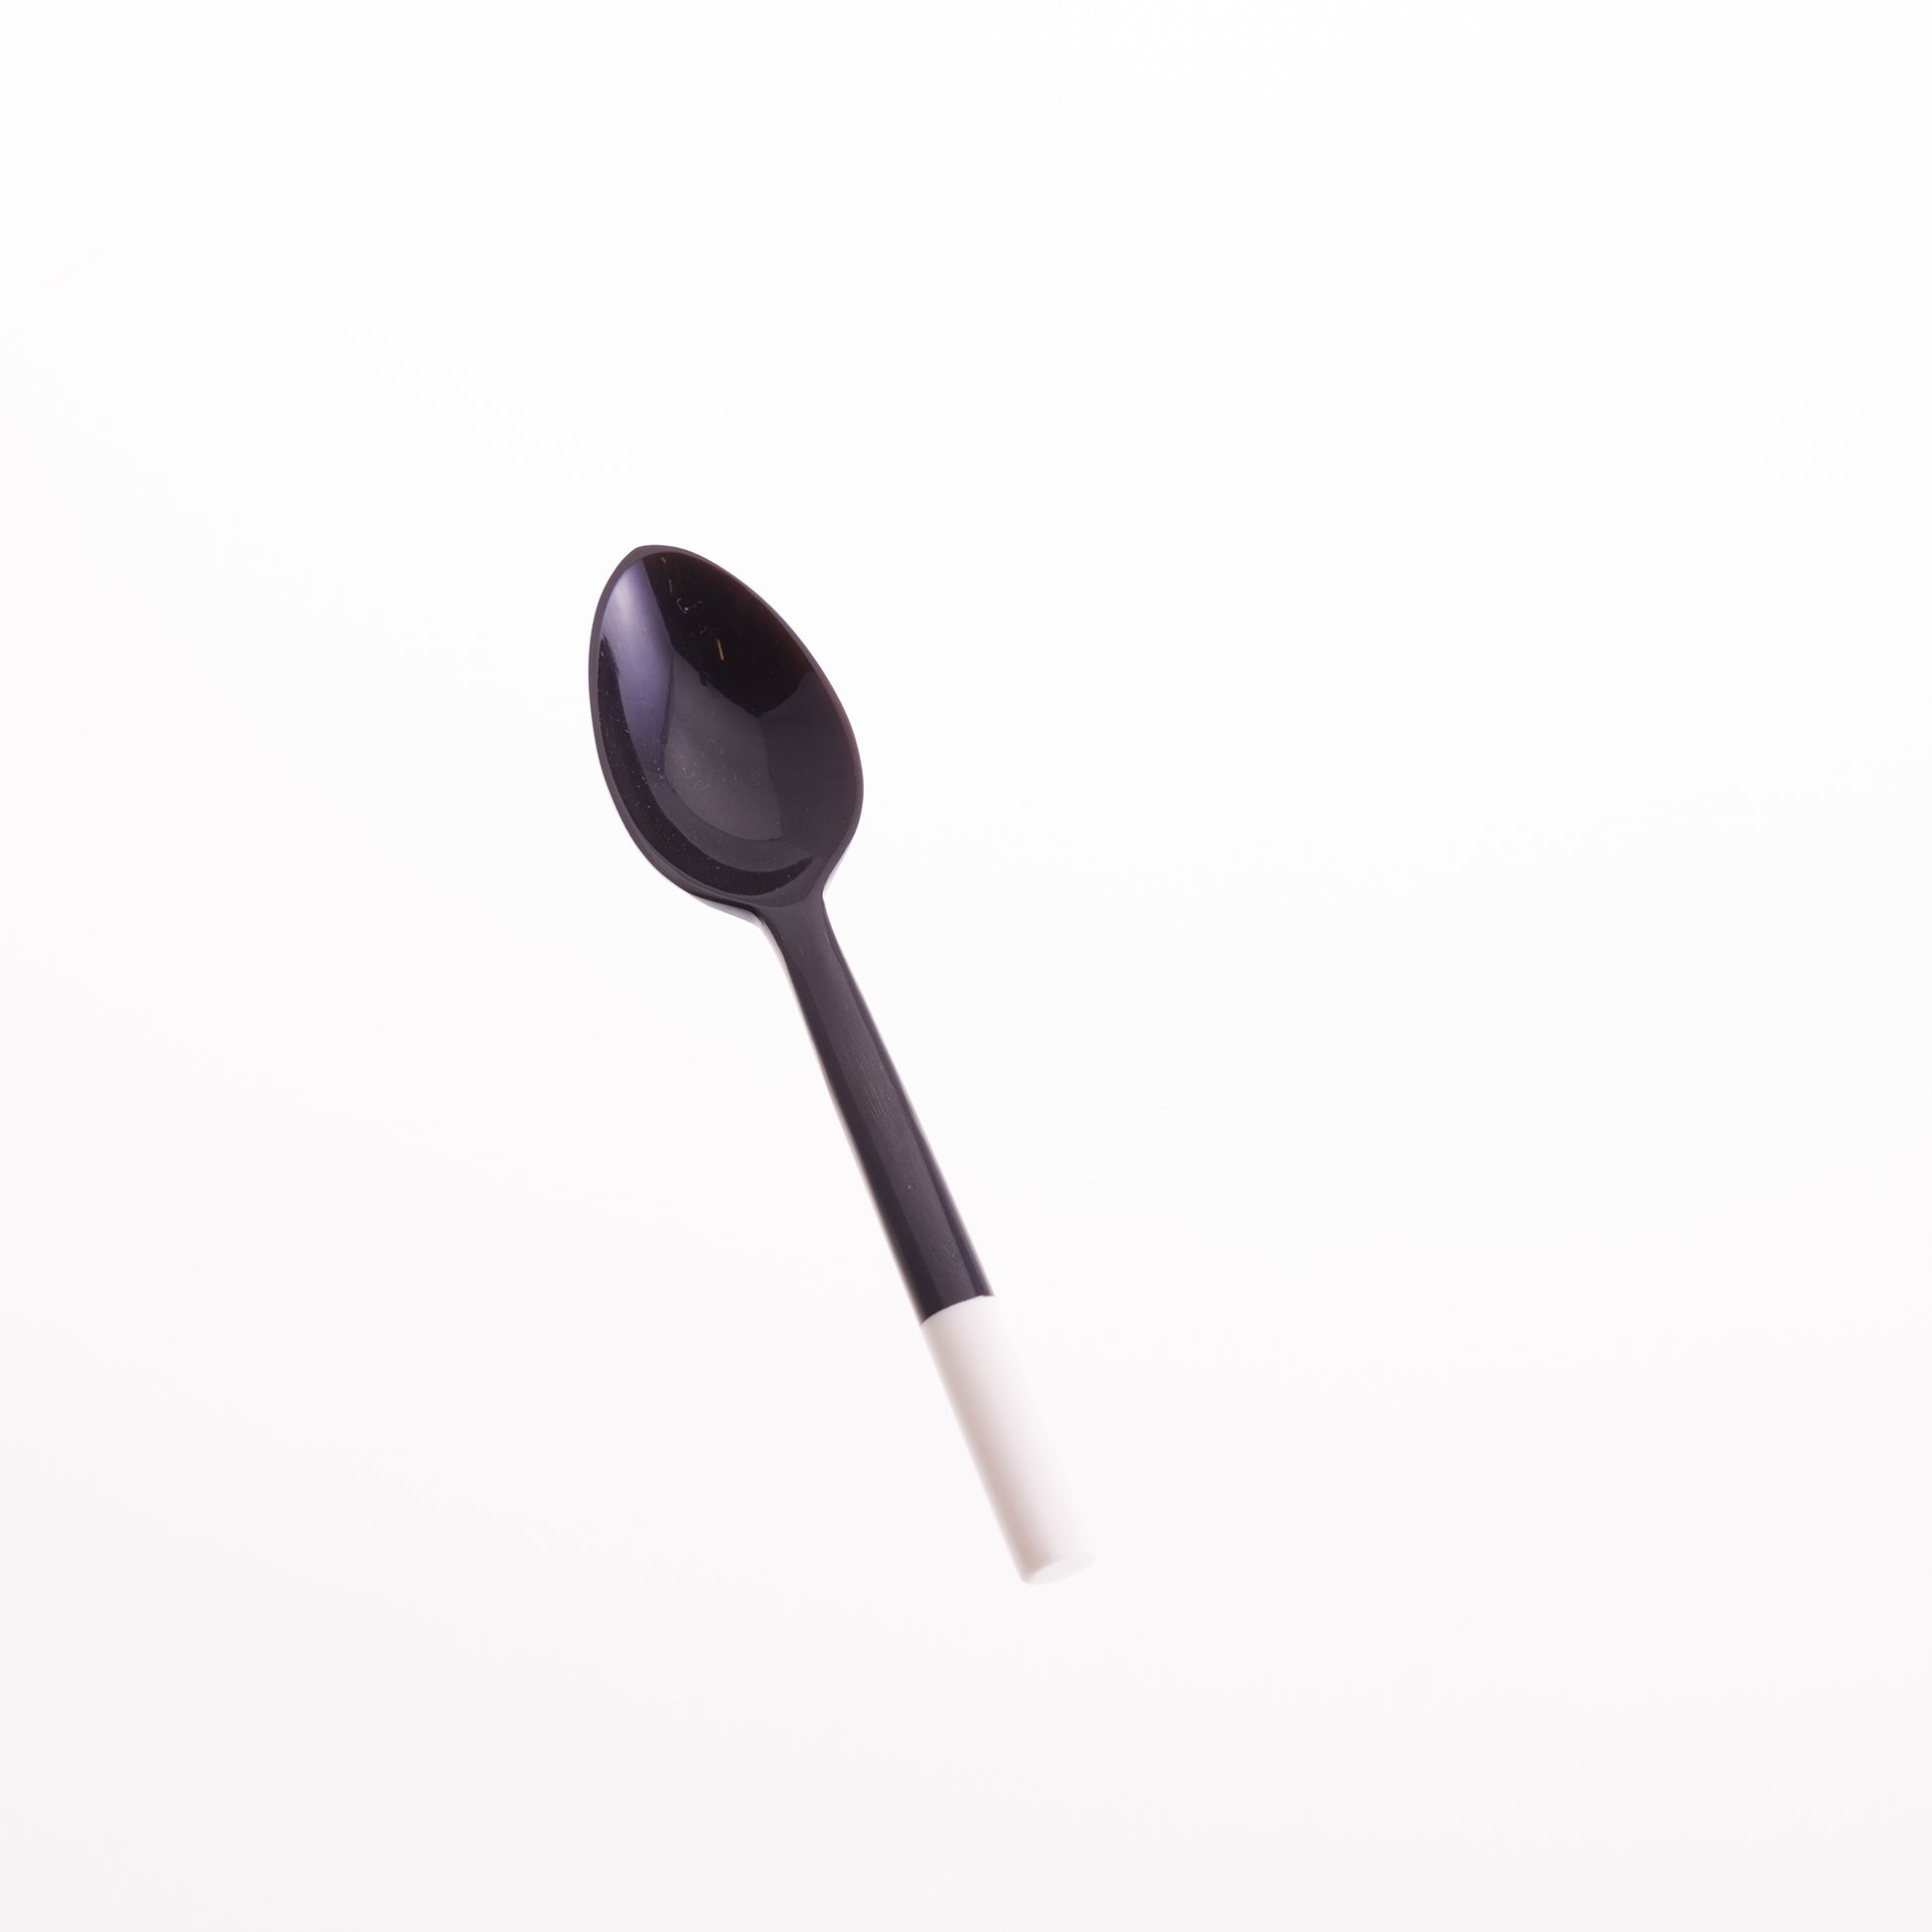 A black horn egg spoons with a white bone tip